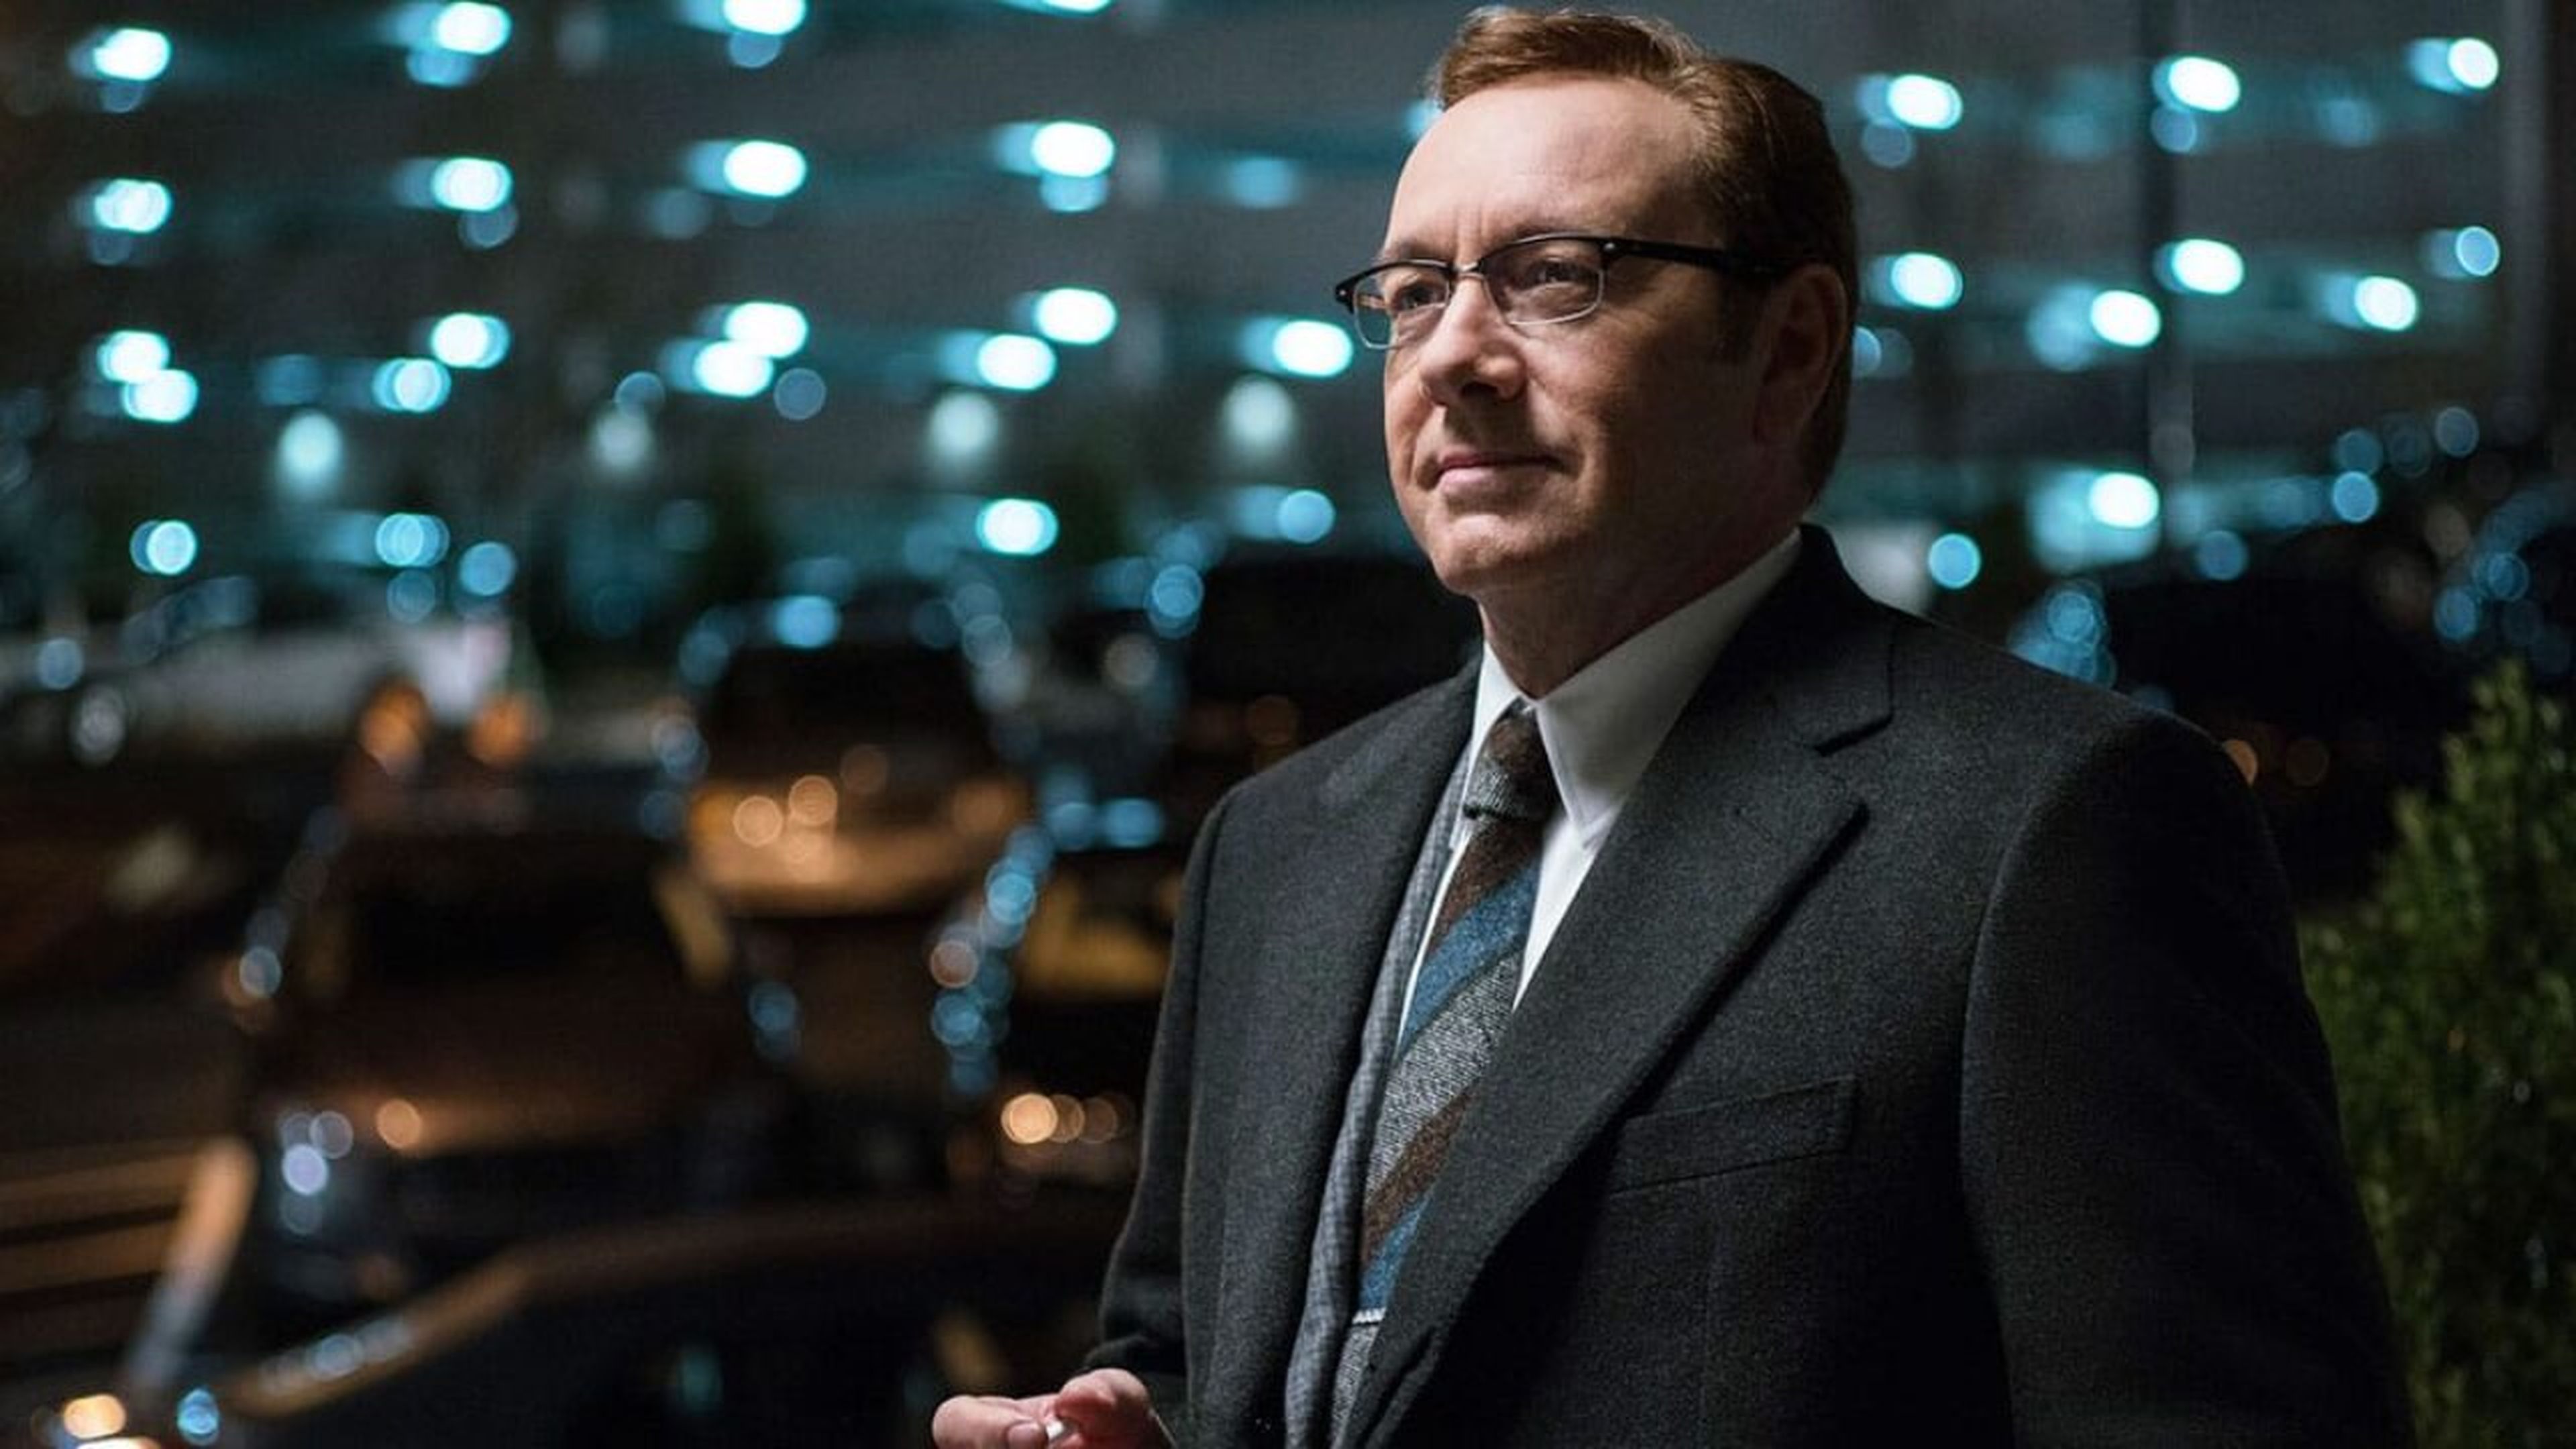 Spacey Unmasked